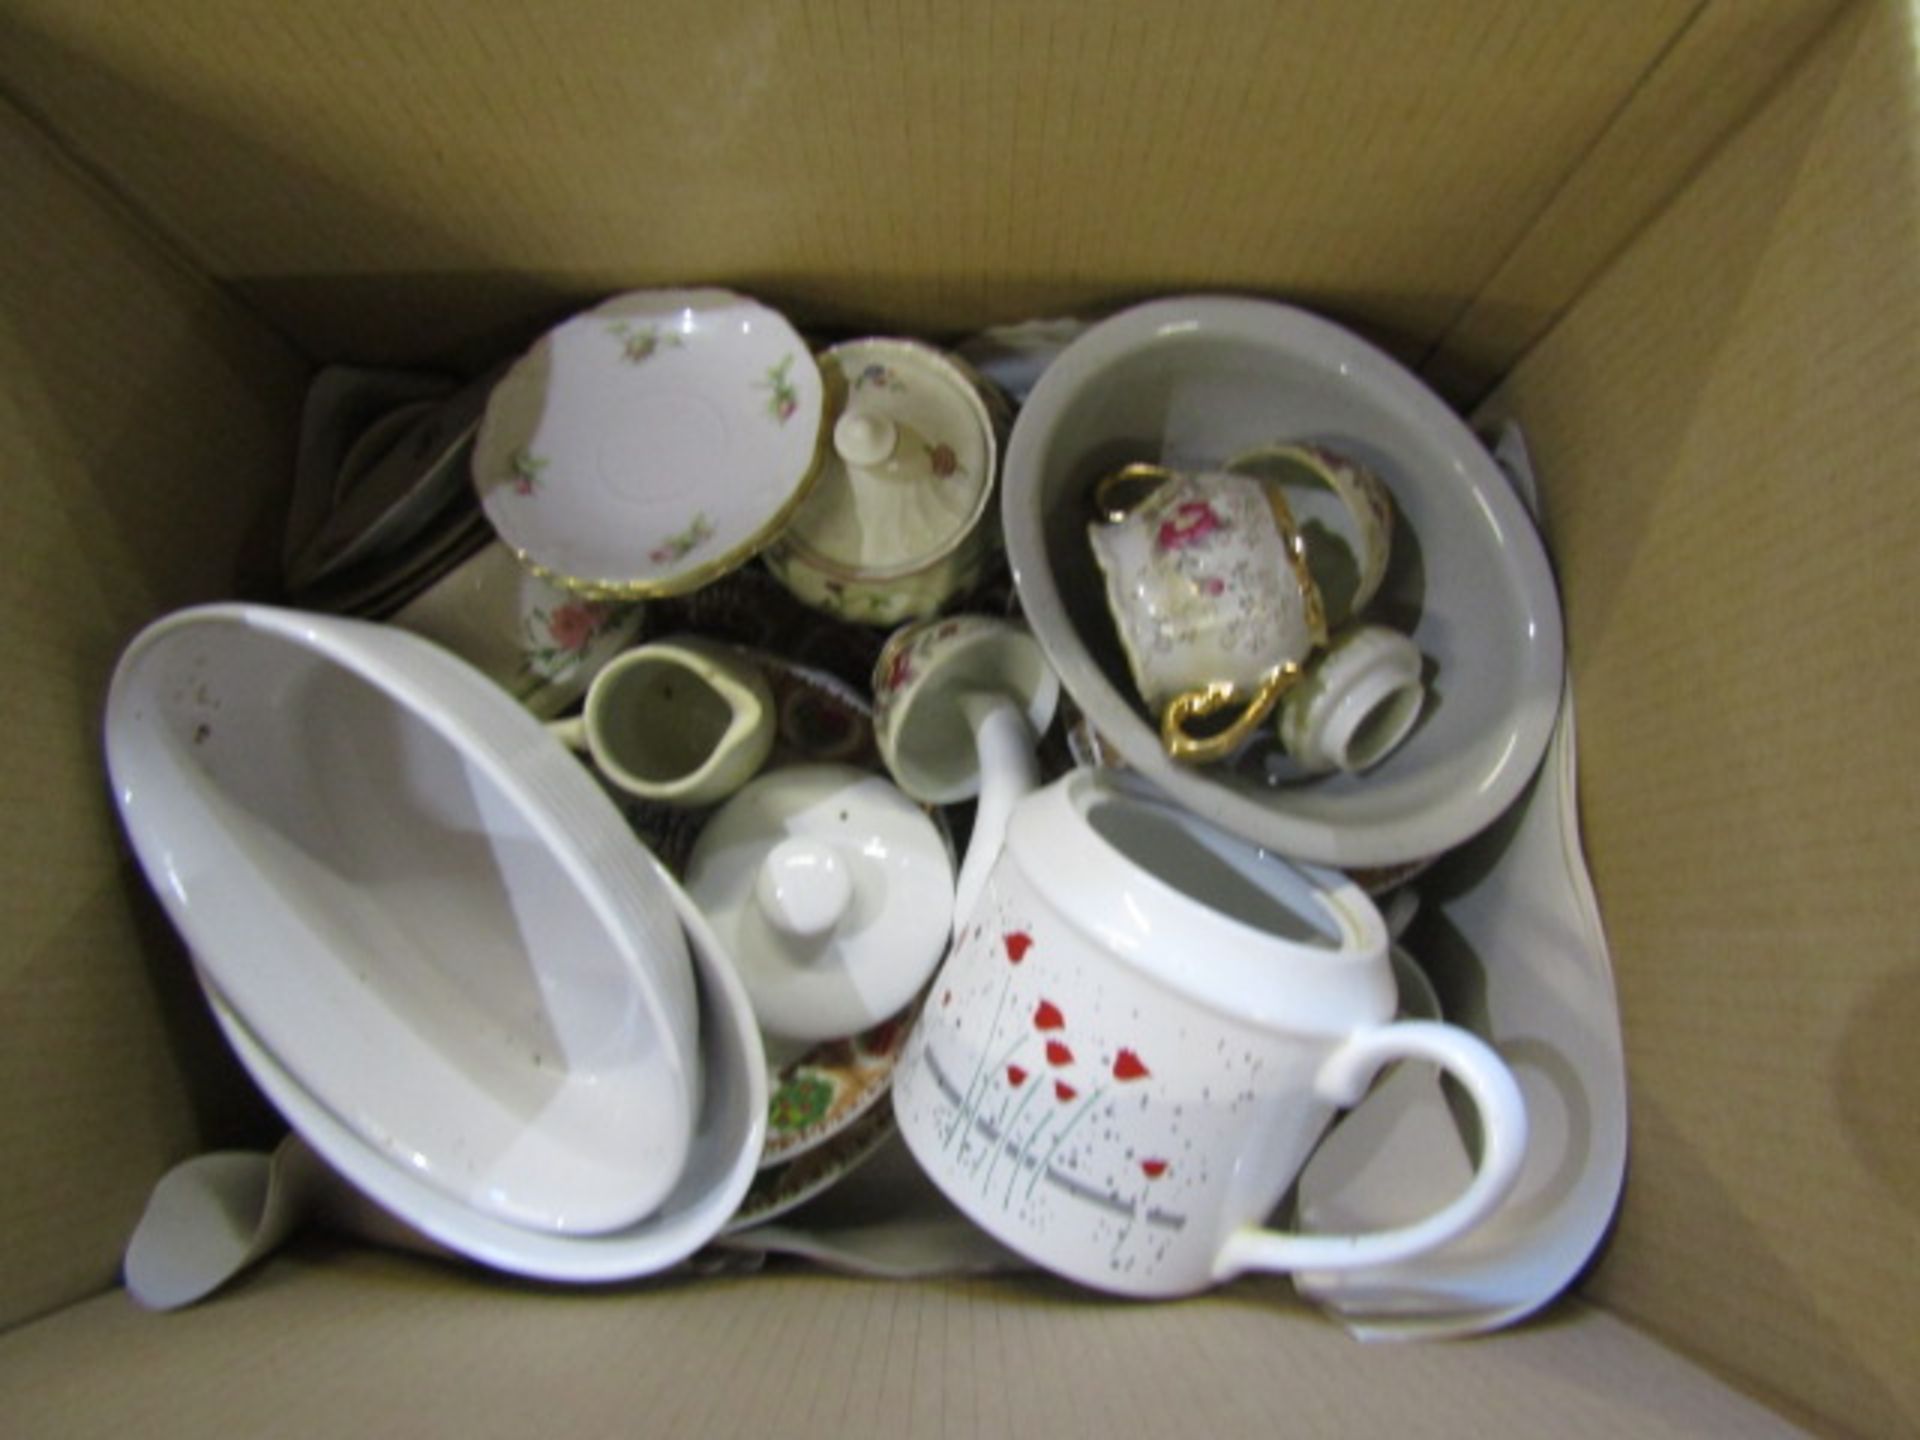 A stillage of china, glass and sundry items Stillage not included and all items must be removed - Image 15 of 15